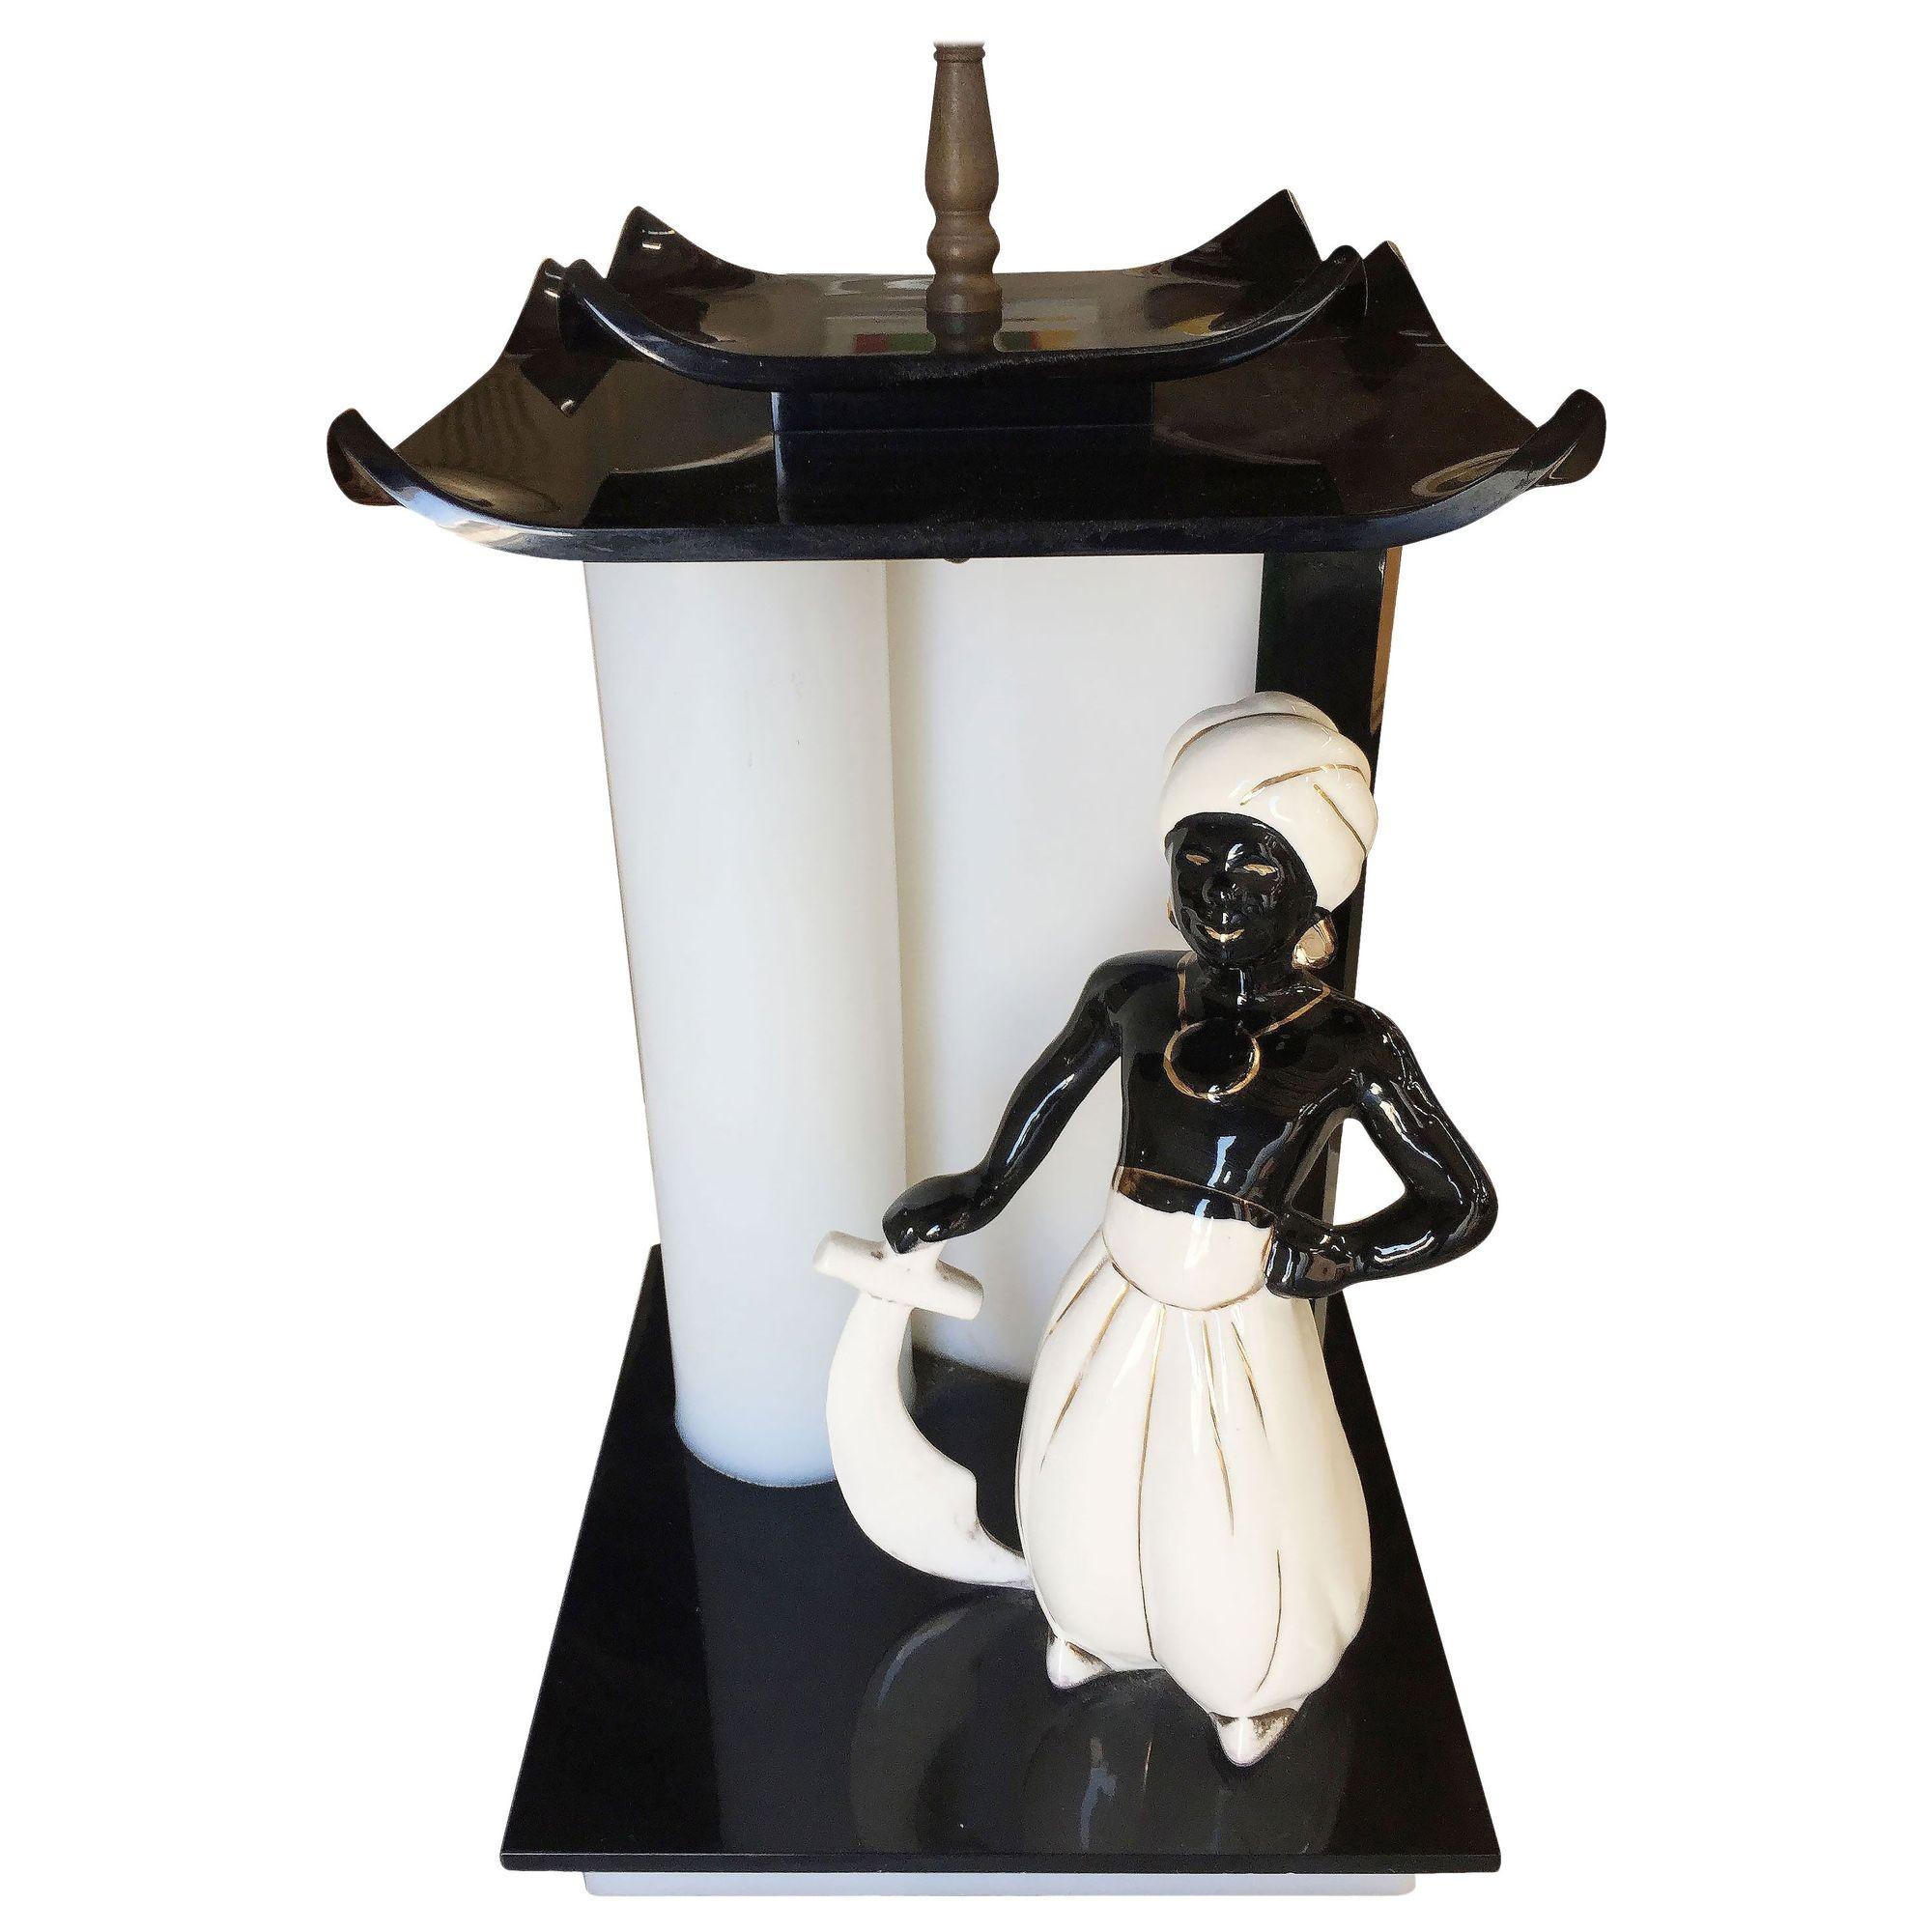 Mid-century Arabian 1950 inspired Lucite lamp by Moss featuring a handcrafted acrylic lamp with decorative ceramic China man statue in the middle.